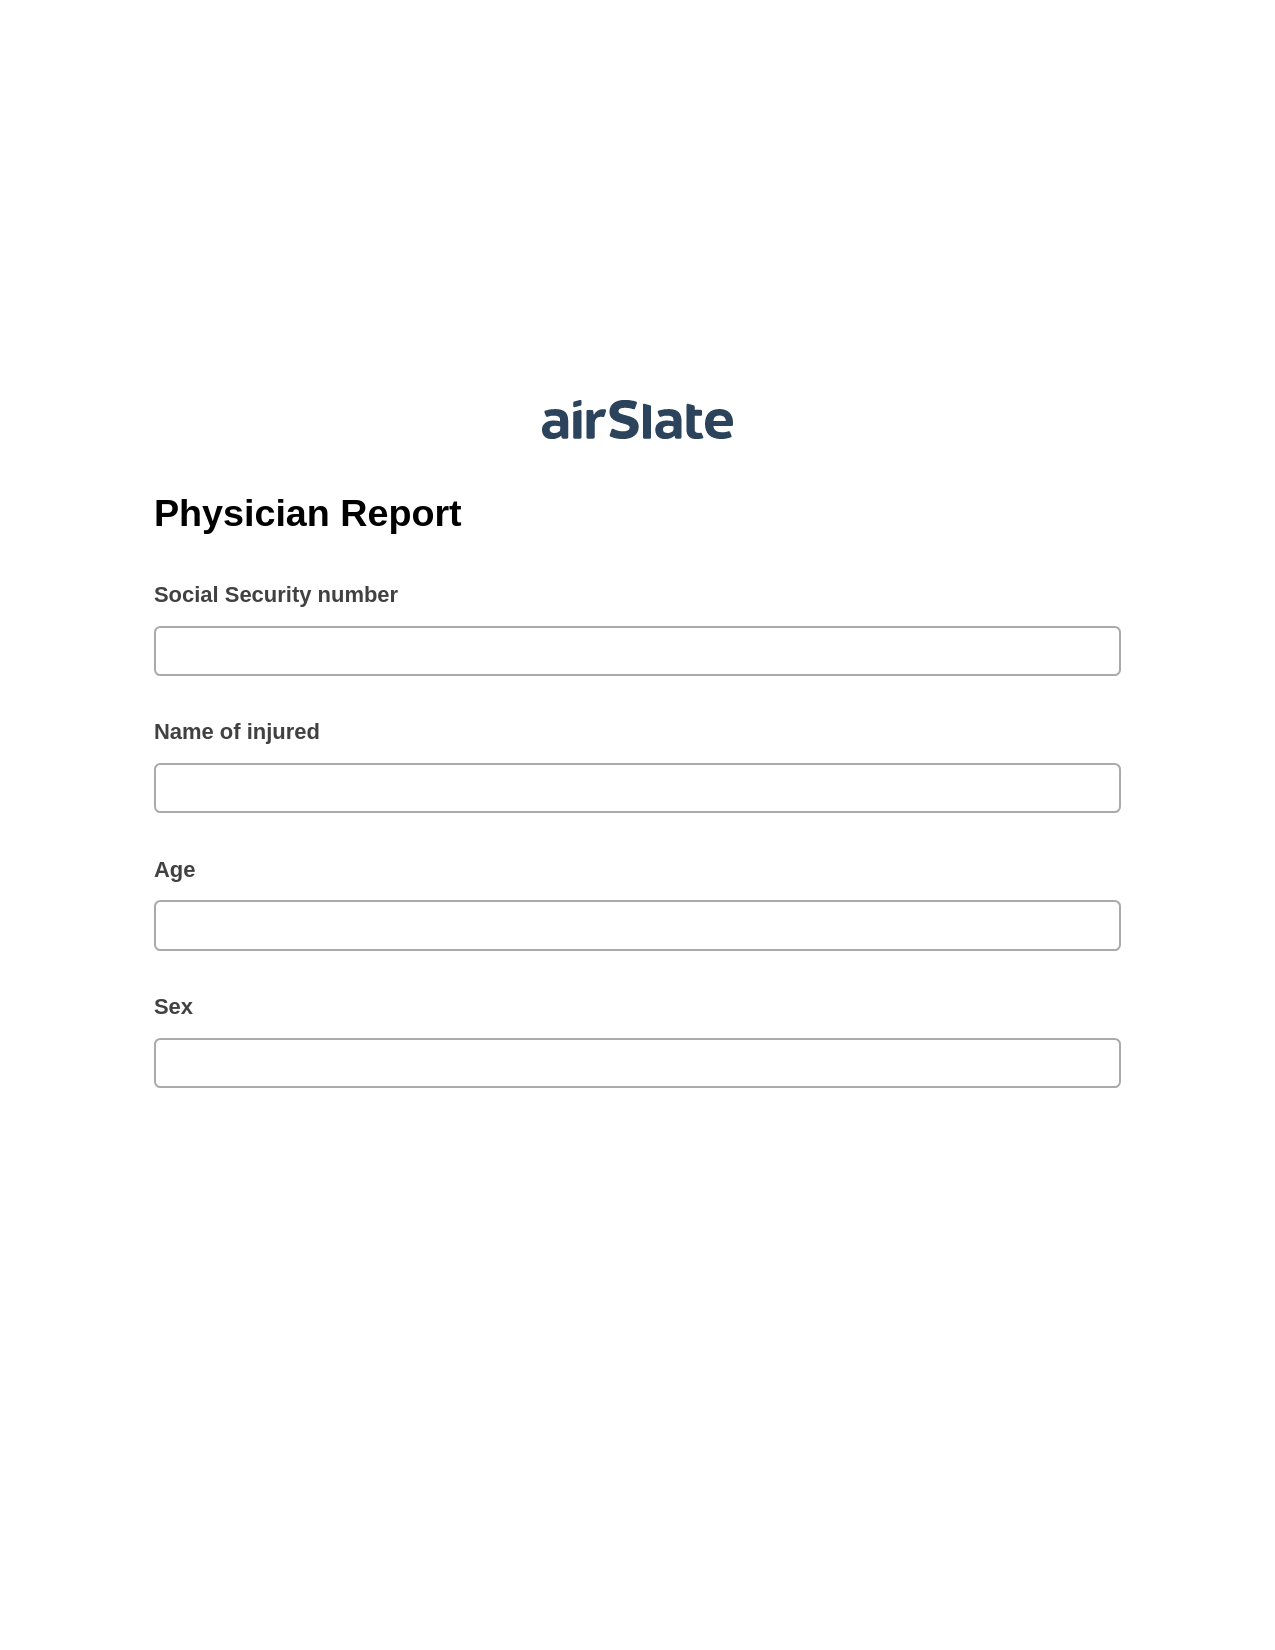 Multirole Physician Report Pre-fill from CSV File Bot, Create NetSuite Record bot, Archive to Dropbox Bot